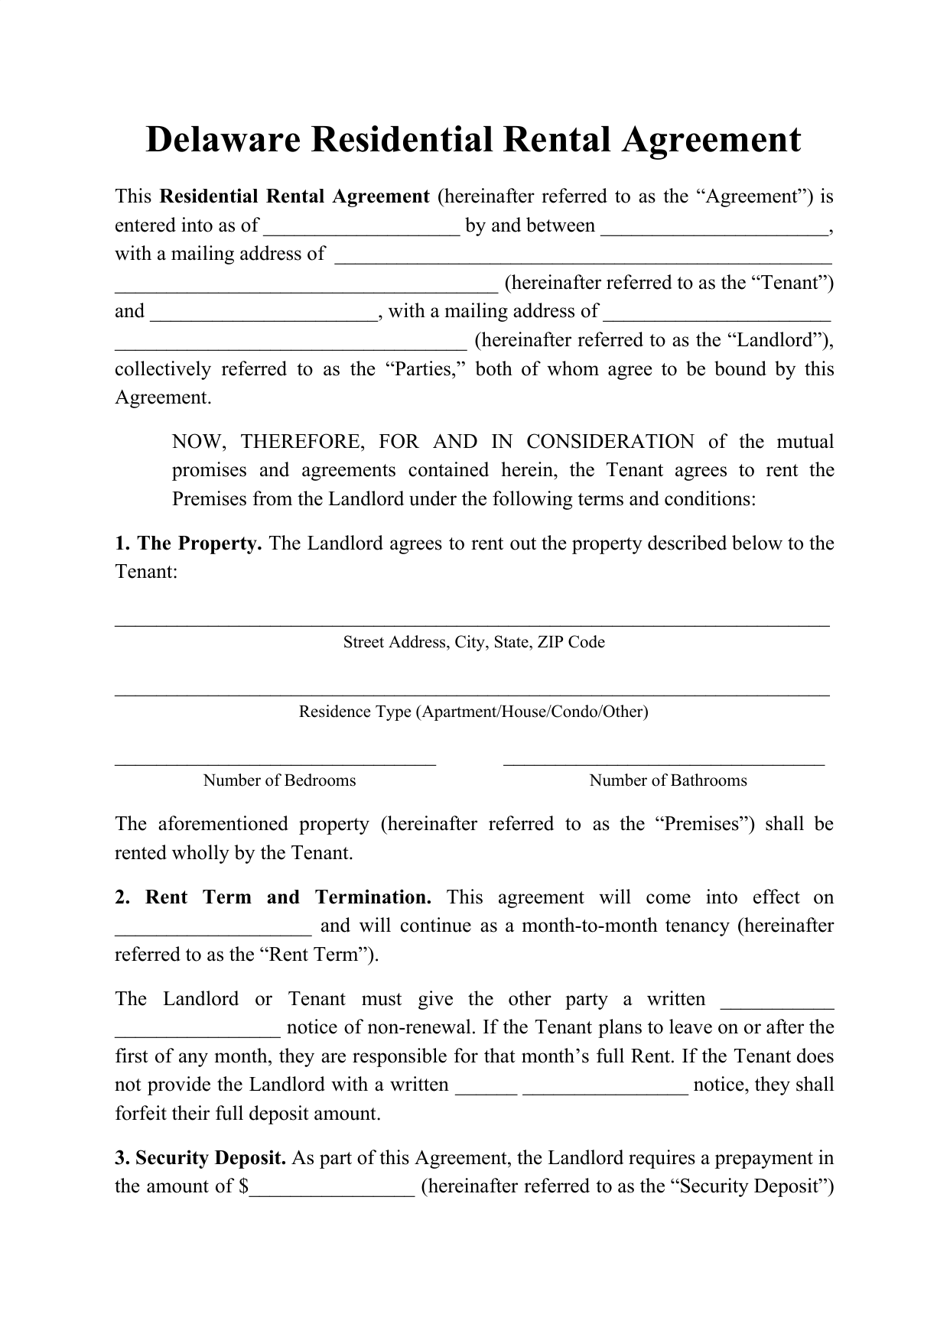 Delaware Residential Rental Agreement Template Fill Out, Sign Online